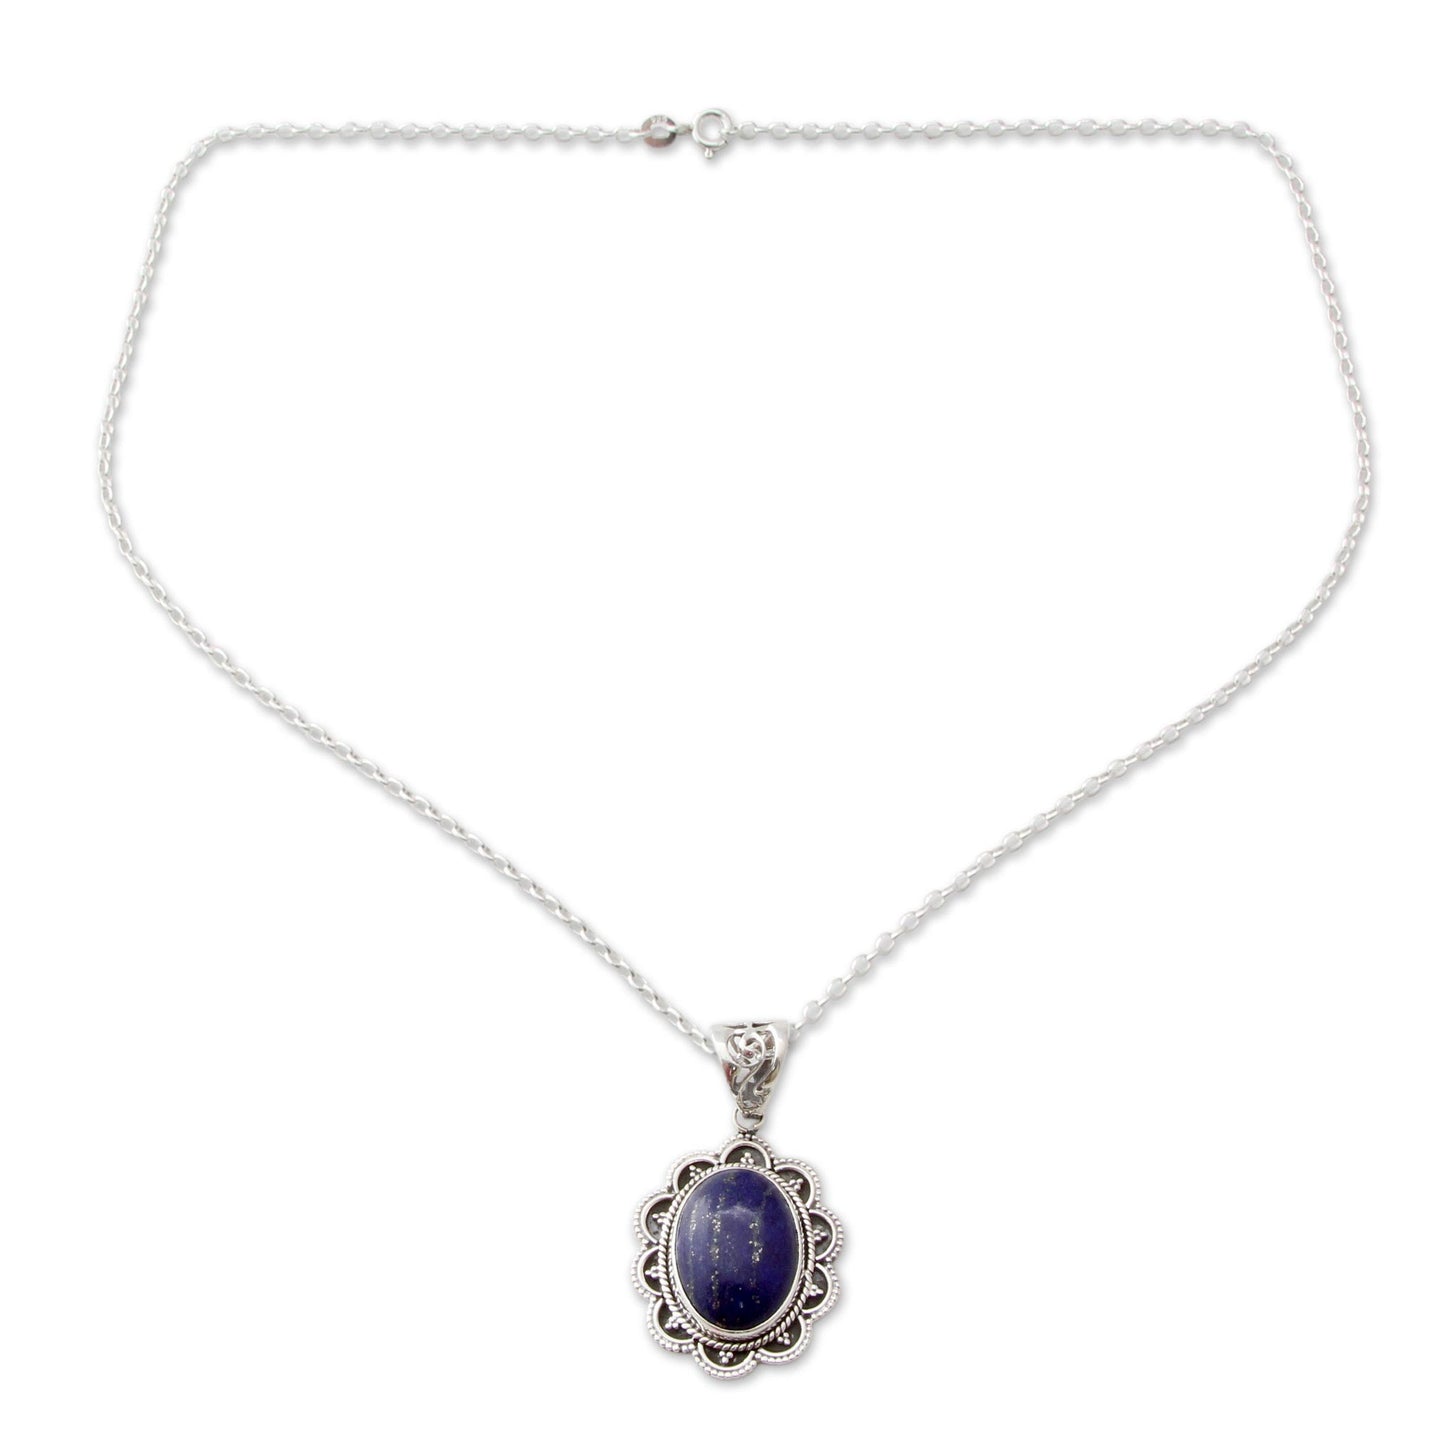 Royal Audience Artisan Crafted Lapis Lazuli and Silver Pendant Necklace